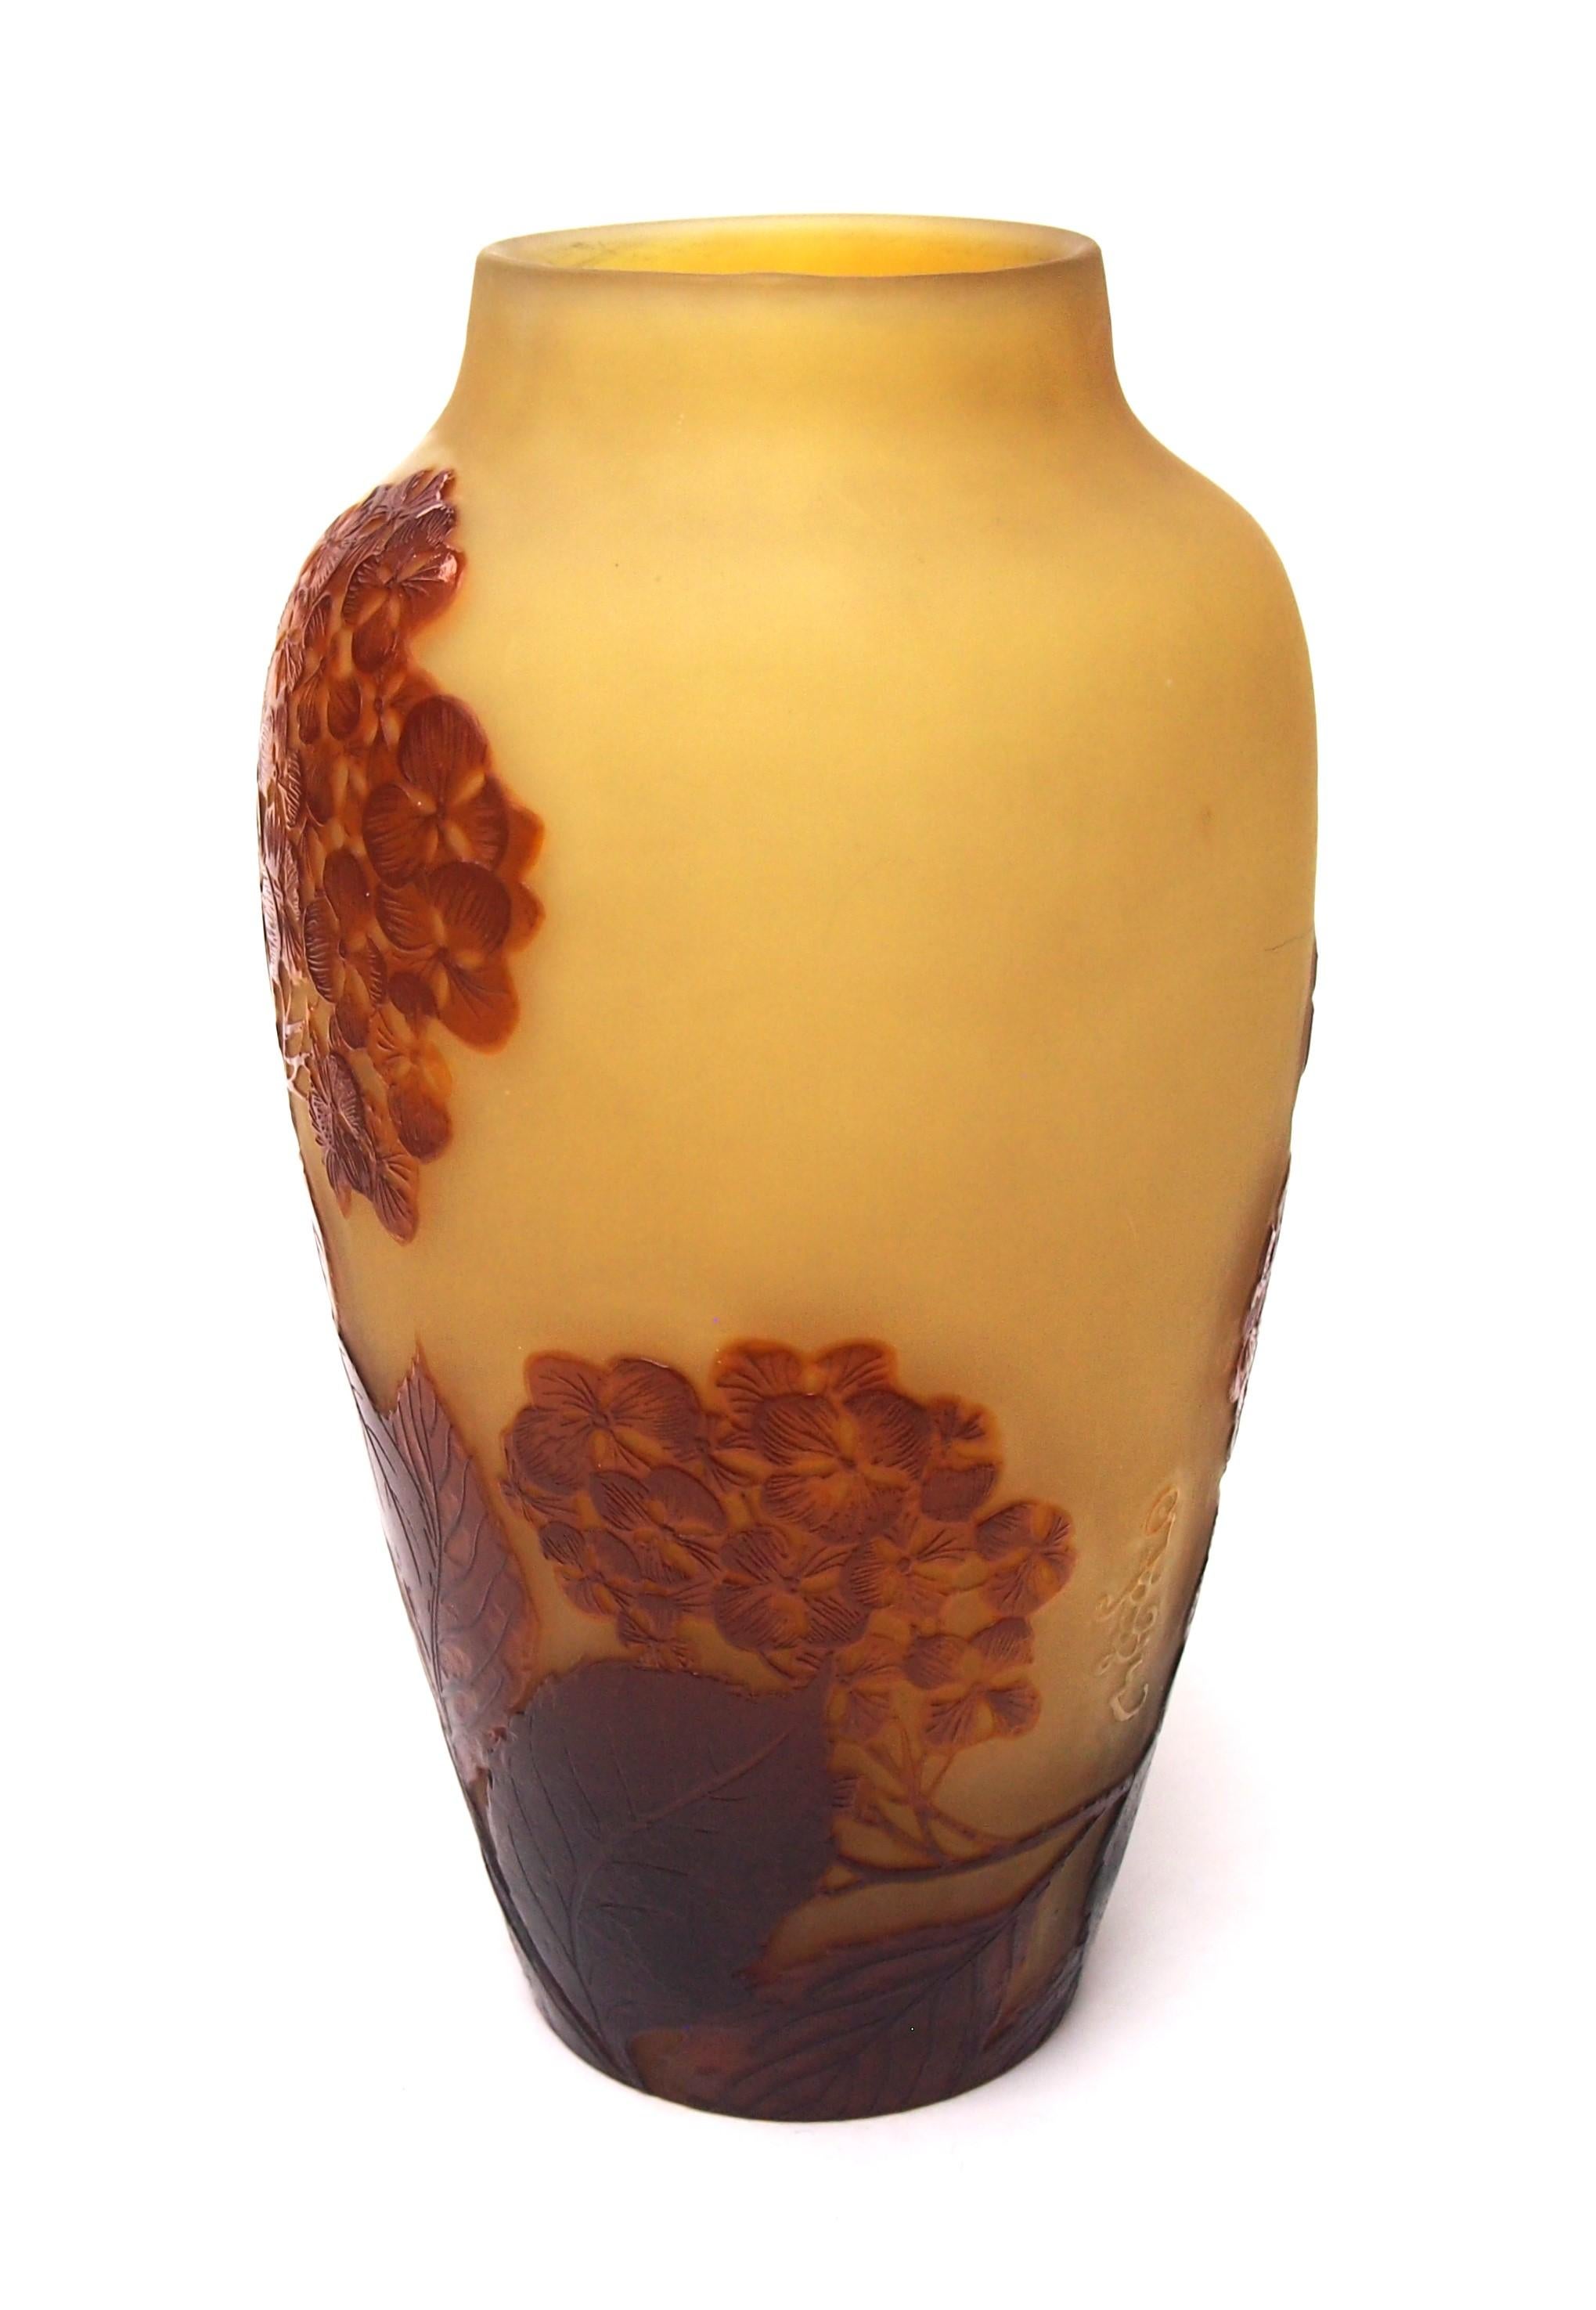 Fabulous late Galle Cameo vase in brown over yellow cleverly and finely depicting naturalistic winter hydrangea and lightly fire polished- This large and exceptional cameo vase is from the last and arguably the finest period of production of the